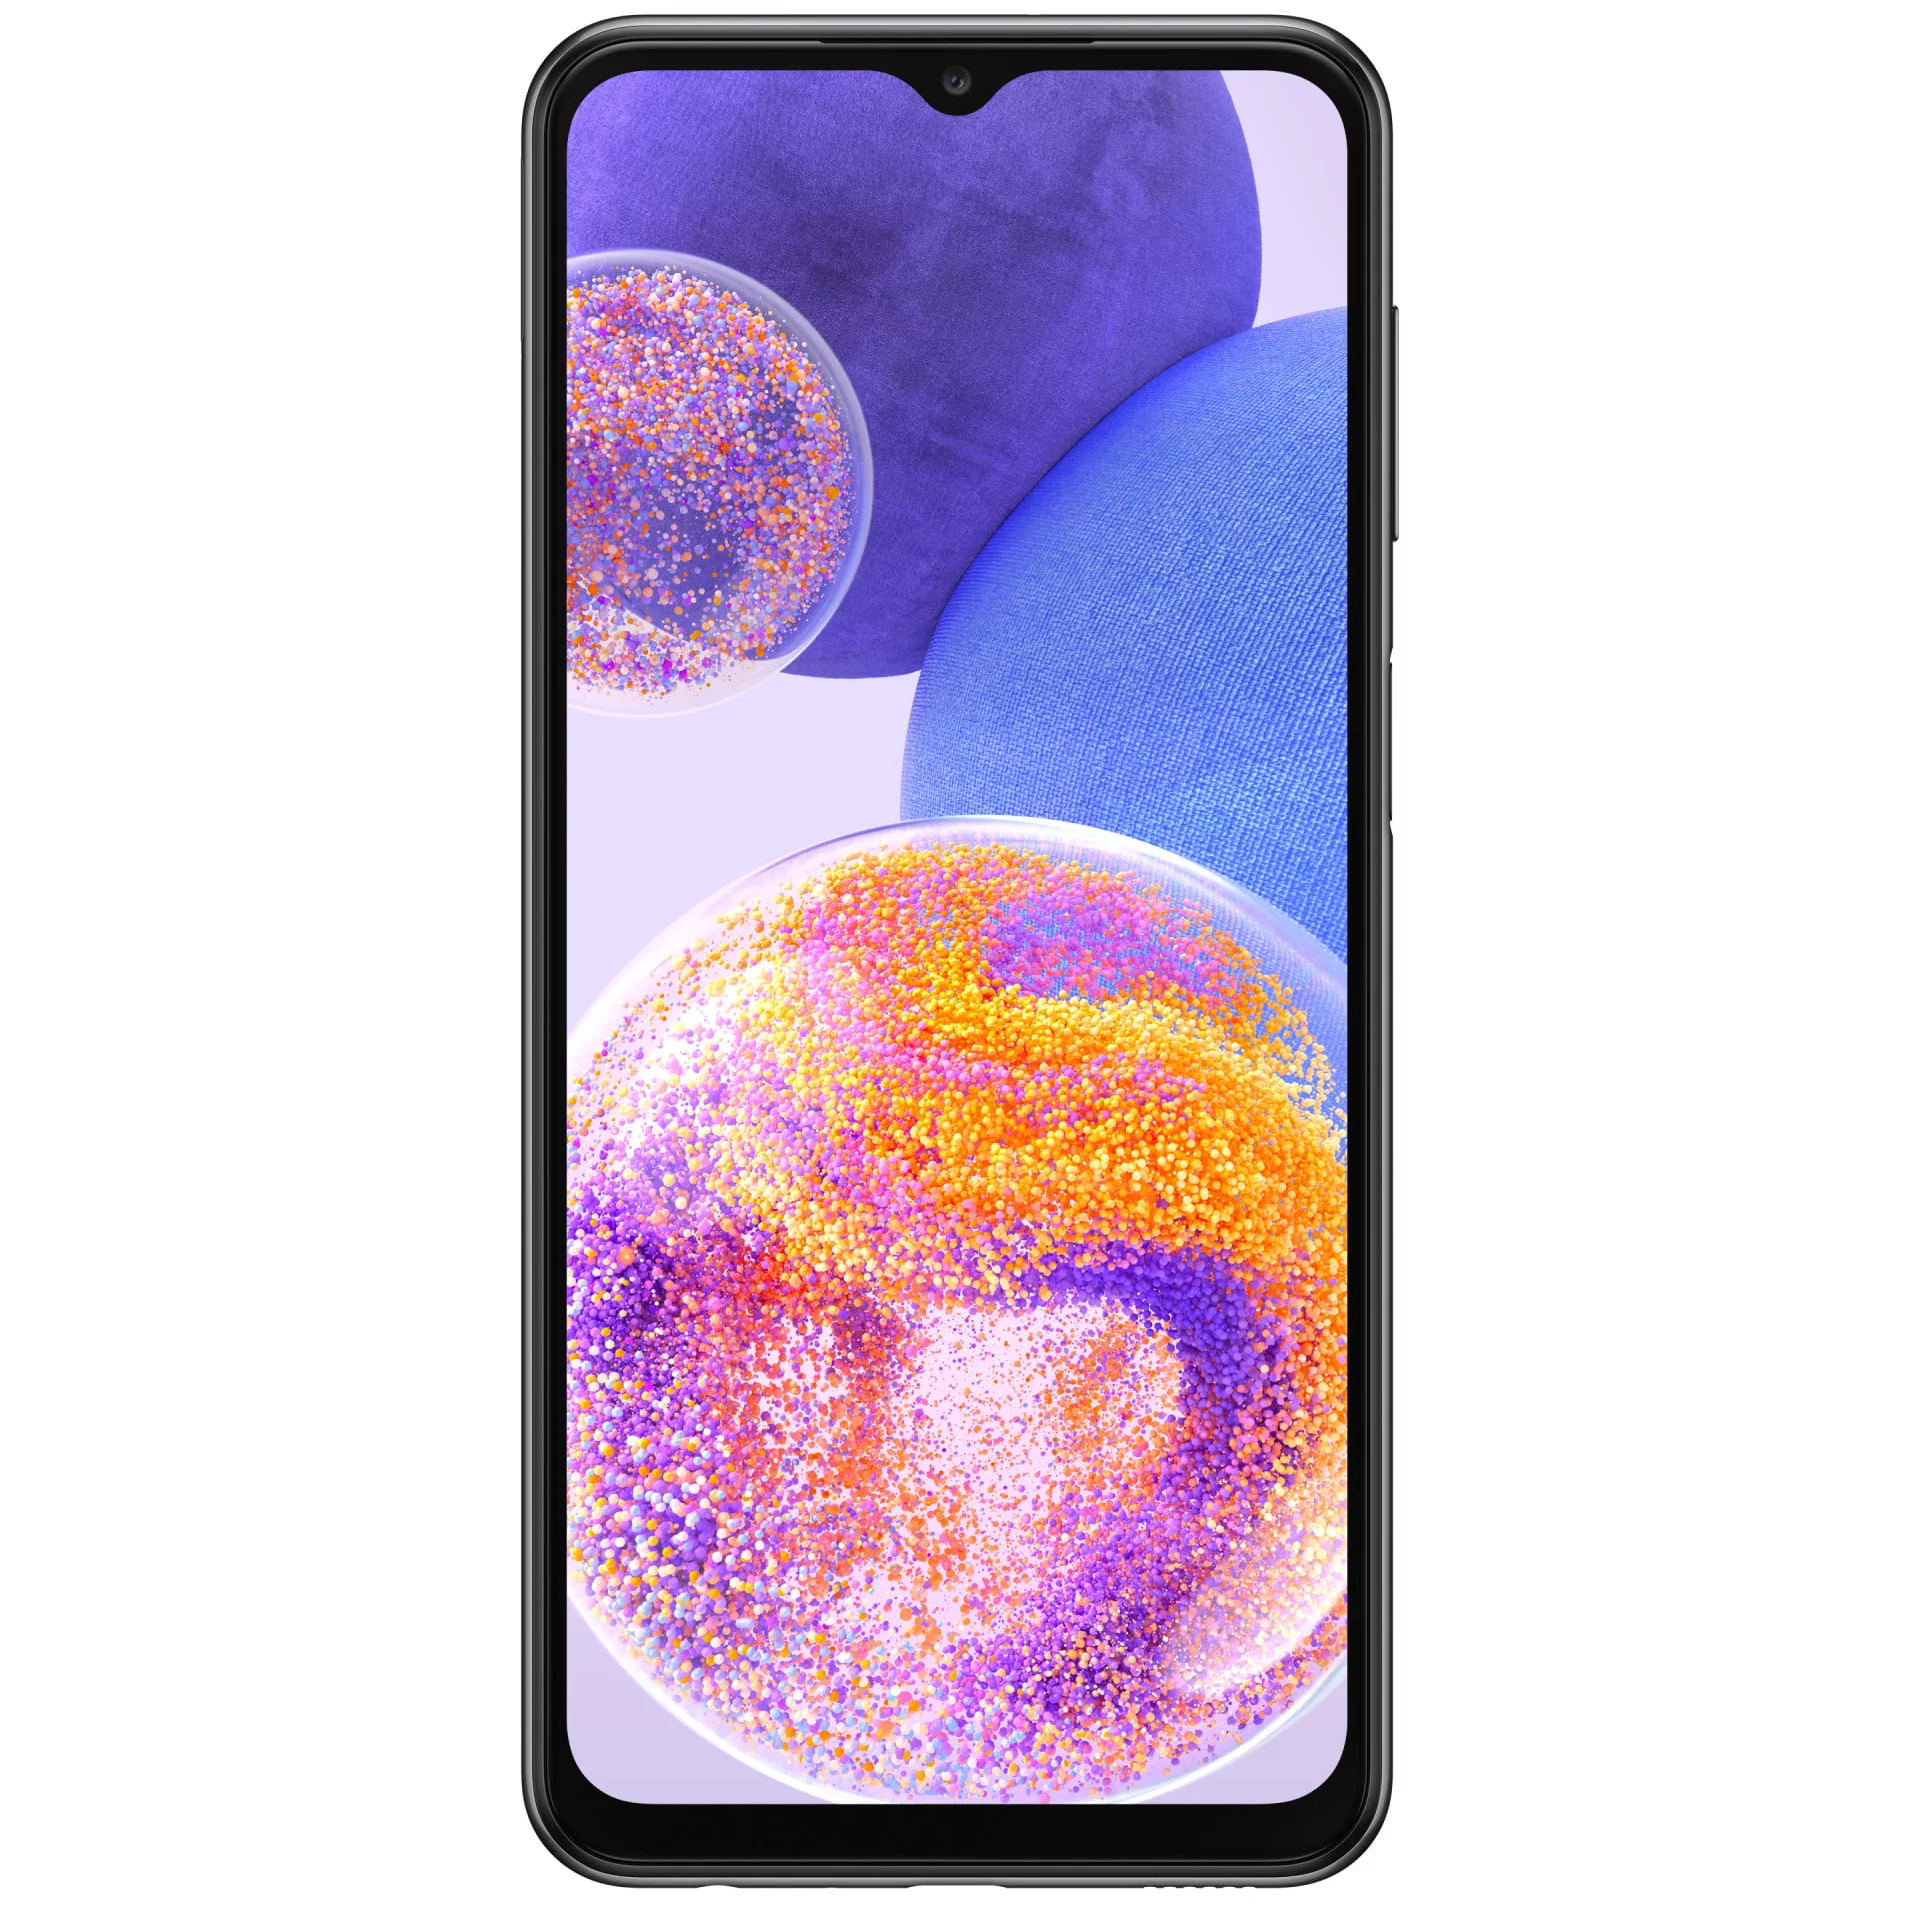 Image of phone available for purchase